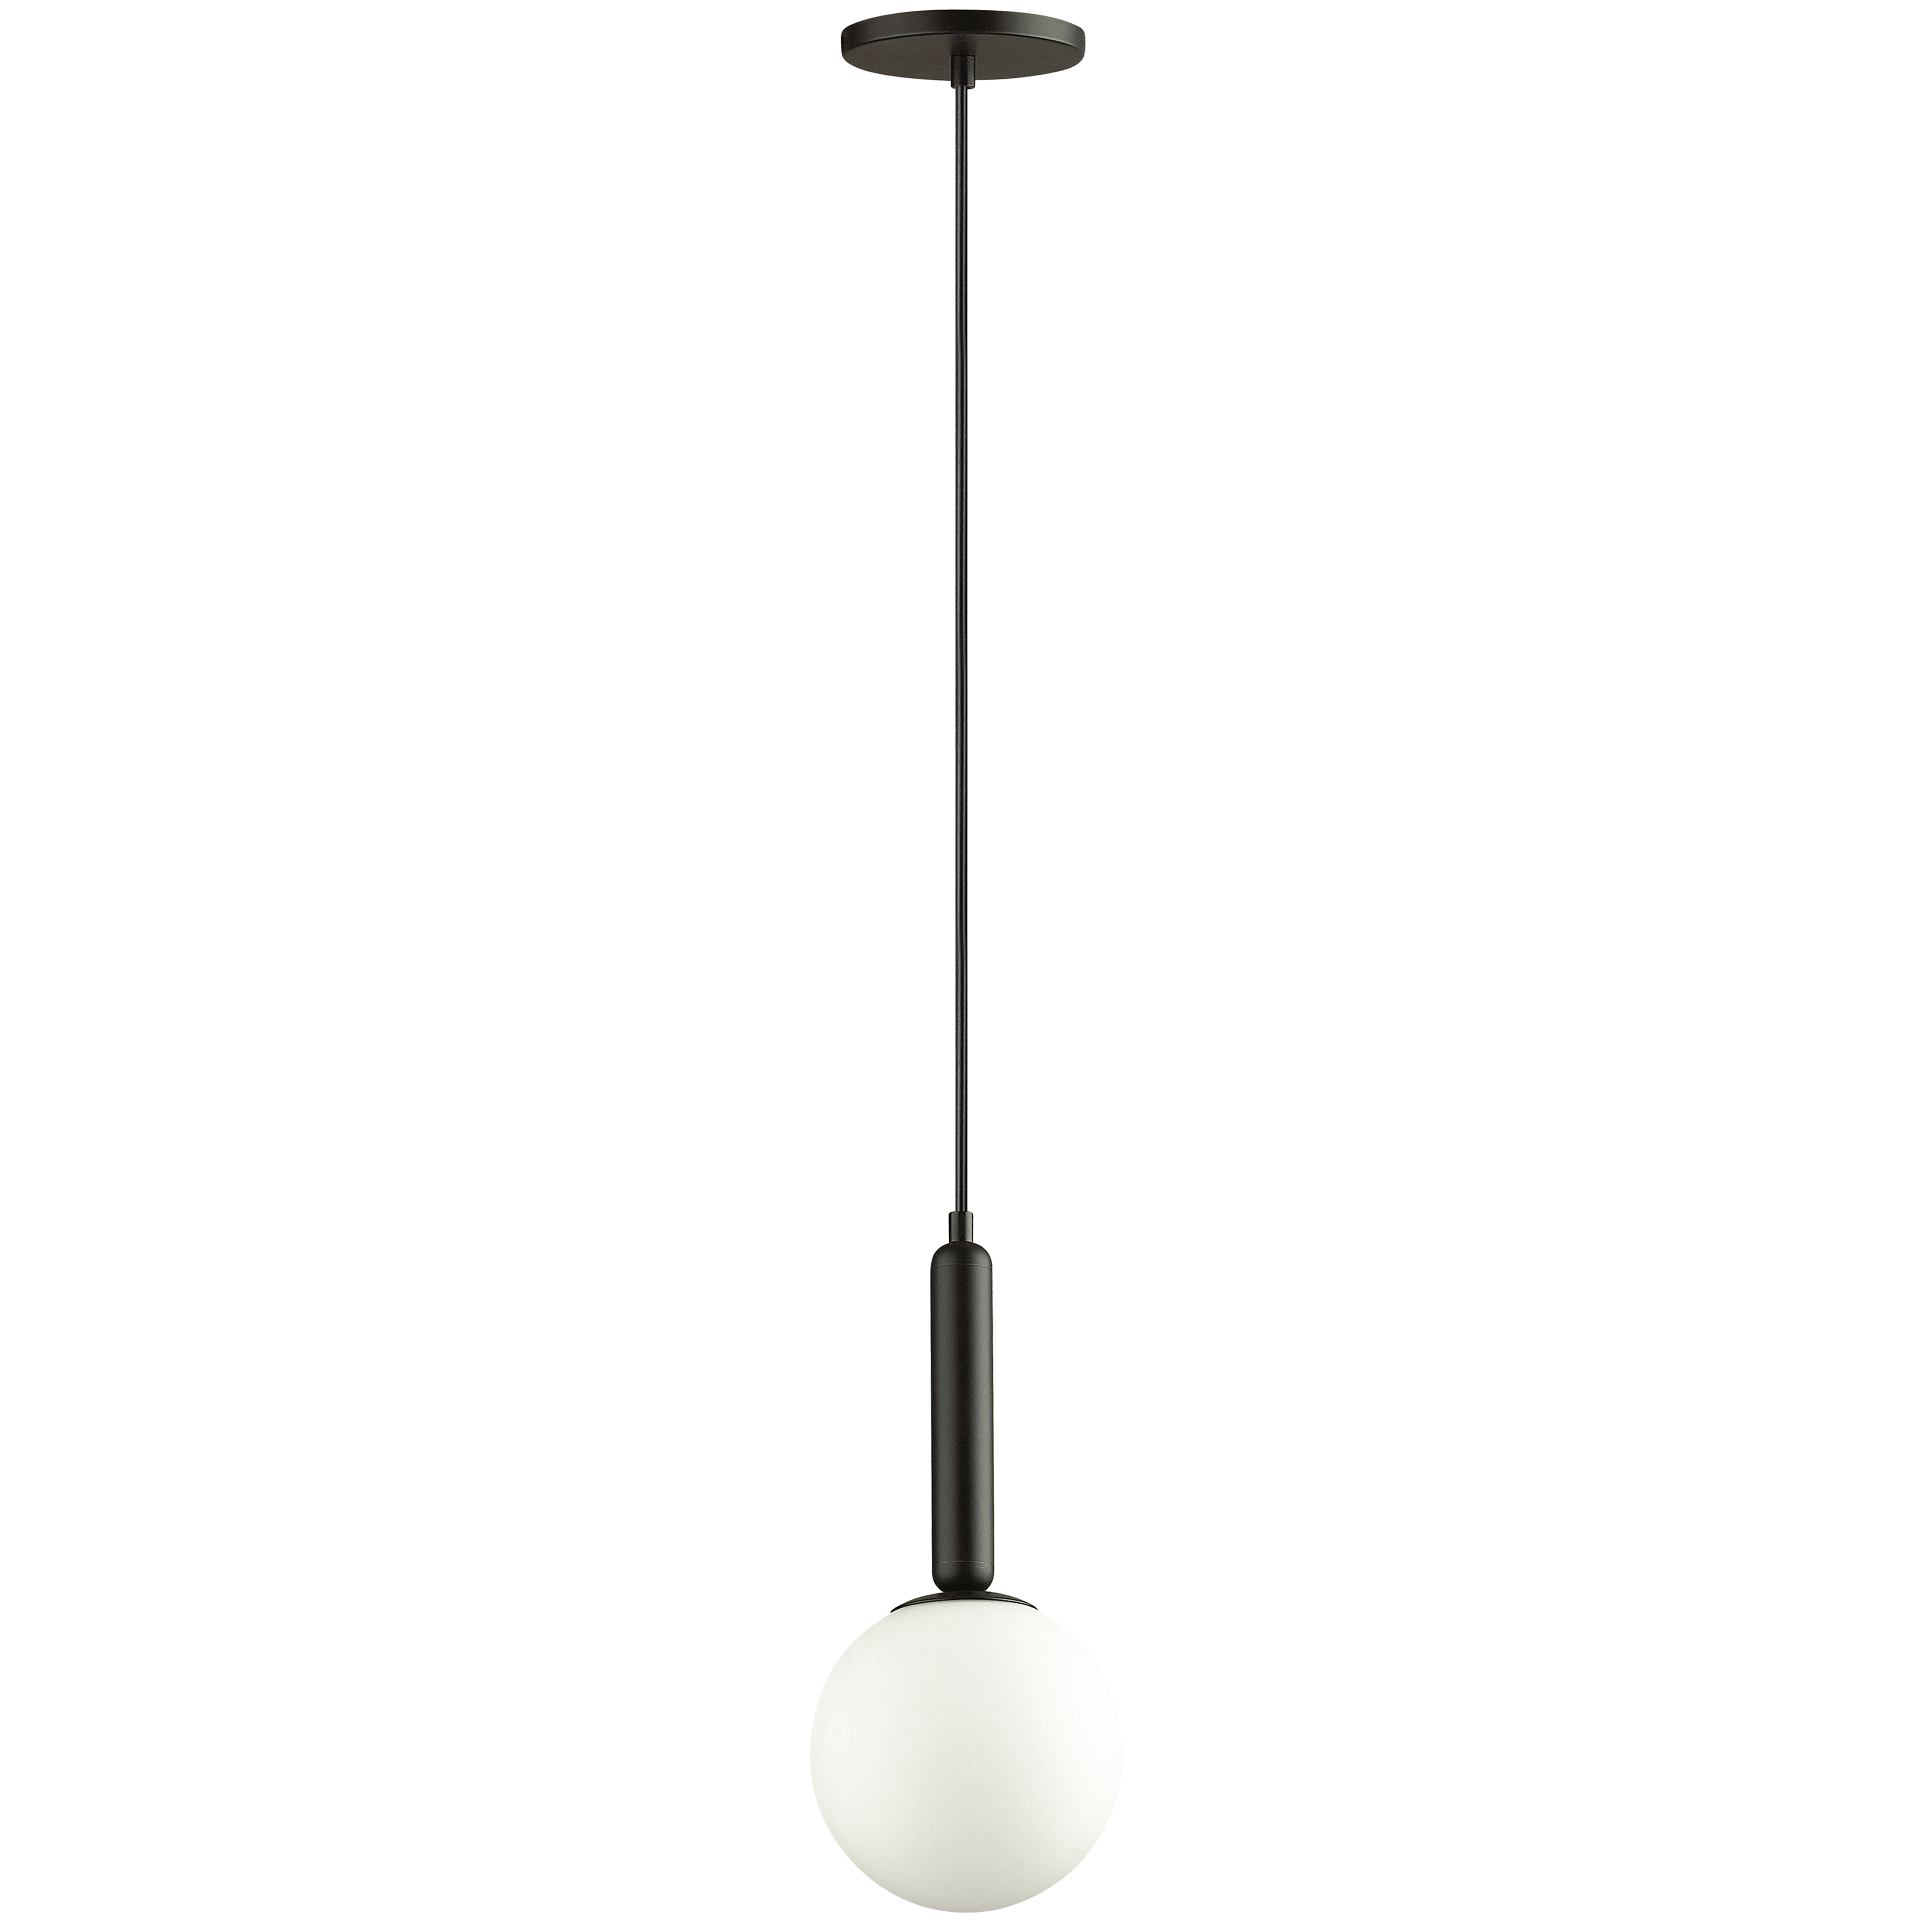 The Tara family of lighting adds a note of eye-catching luxury with a modest footprint that will work in any size room. Variations on the simple theme of a vertical drop with a globe light at the end create a versatile appeal. A simple drop becomes a sturdy cylindrical metal frame/housing. A glass globe contains the light for a look that's contemporary, with configurations that include hammered glass for an intriguing finish. Tara lighting adds a graceful touch to hallways, kitchens and dinettes.